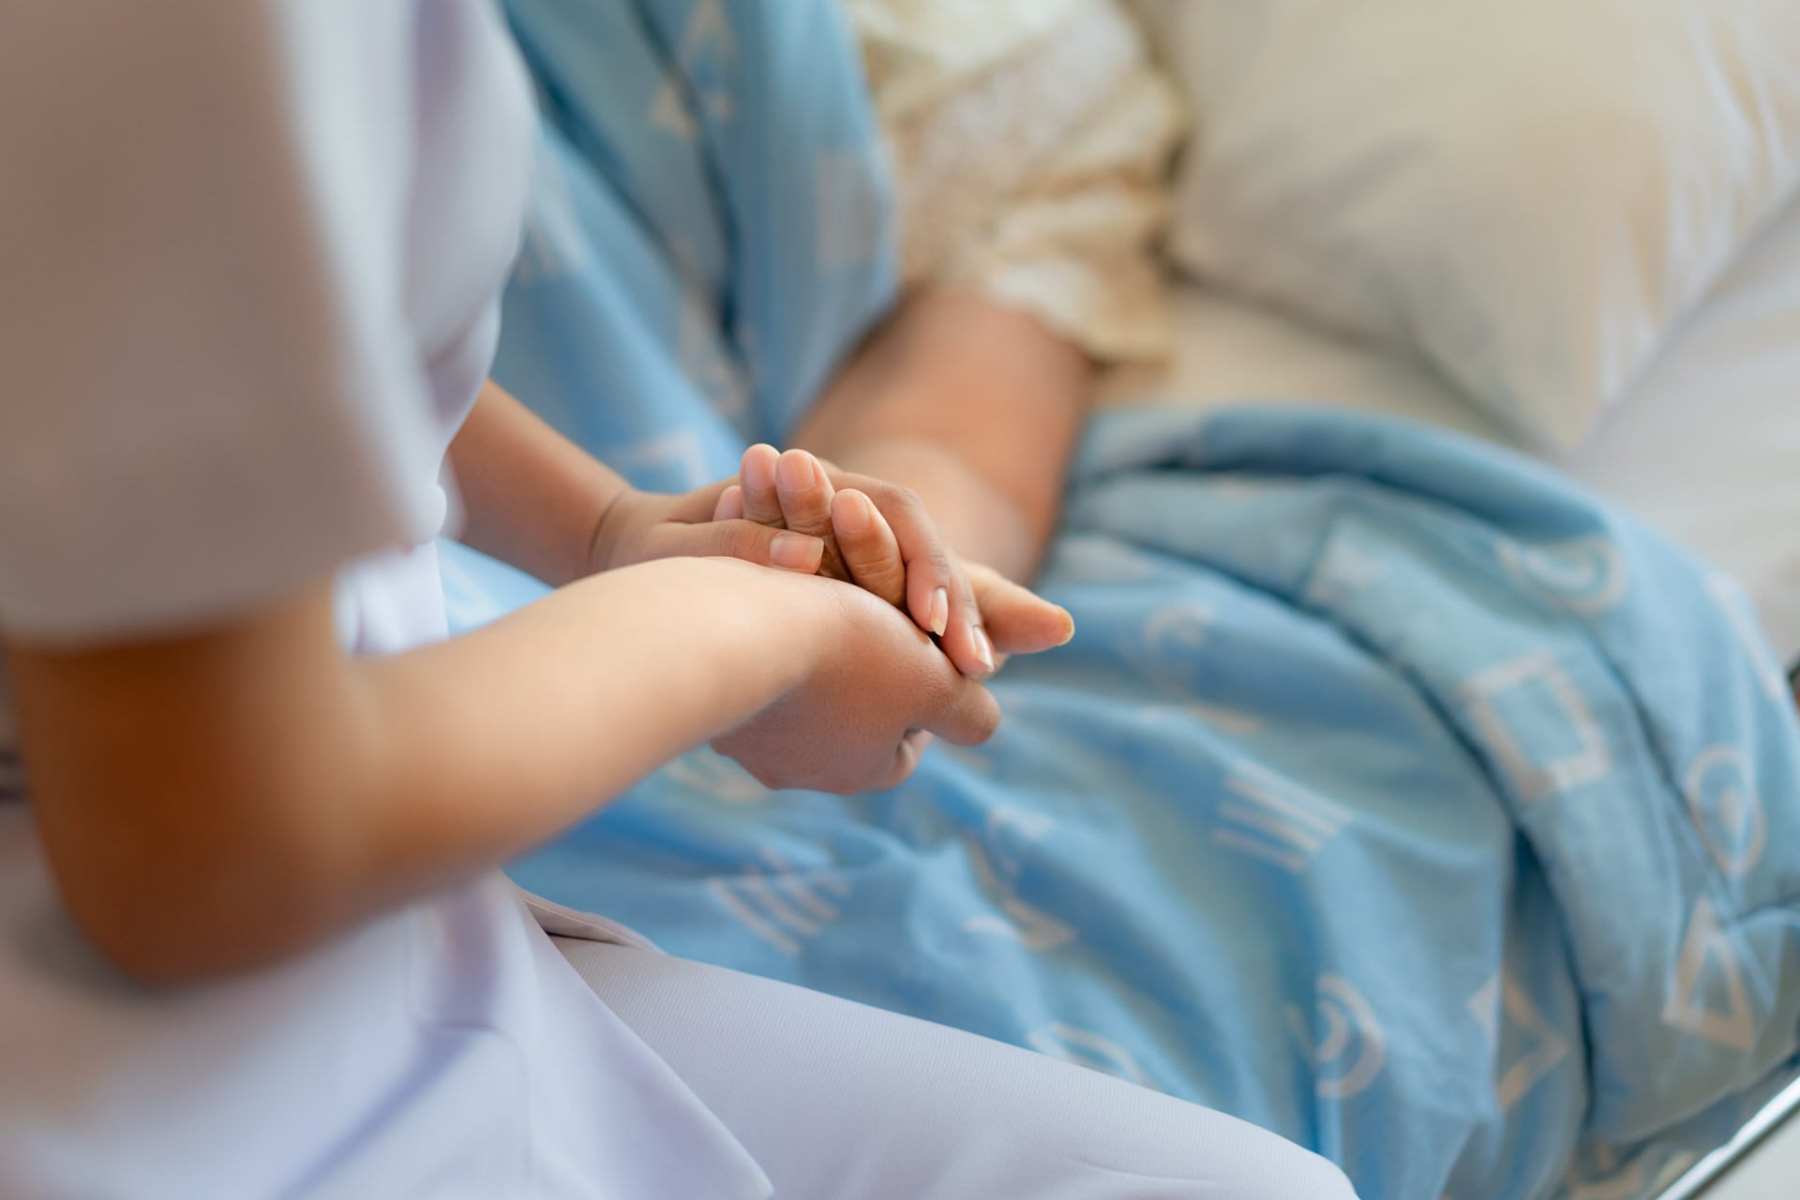 A nurse sitting on a hospital bed next to an older woman holding her hand.